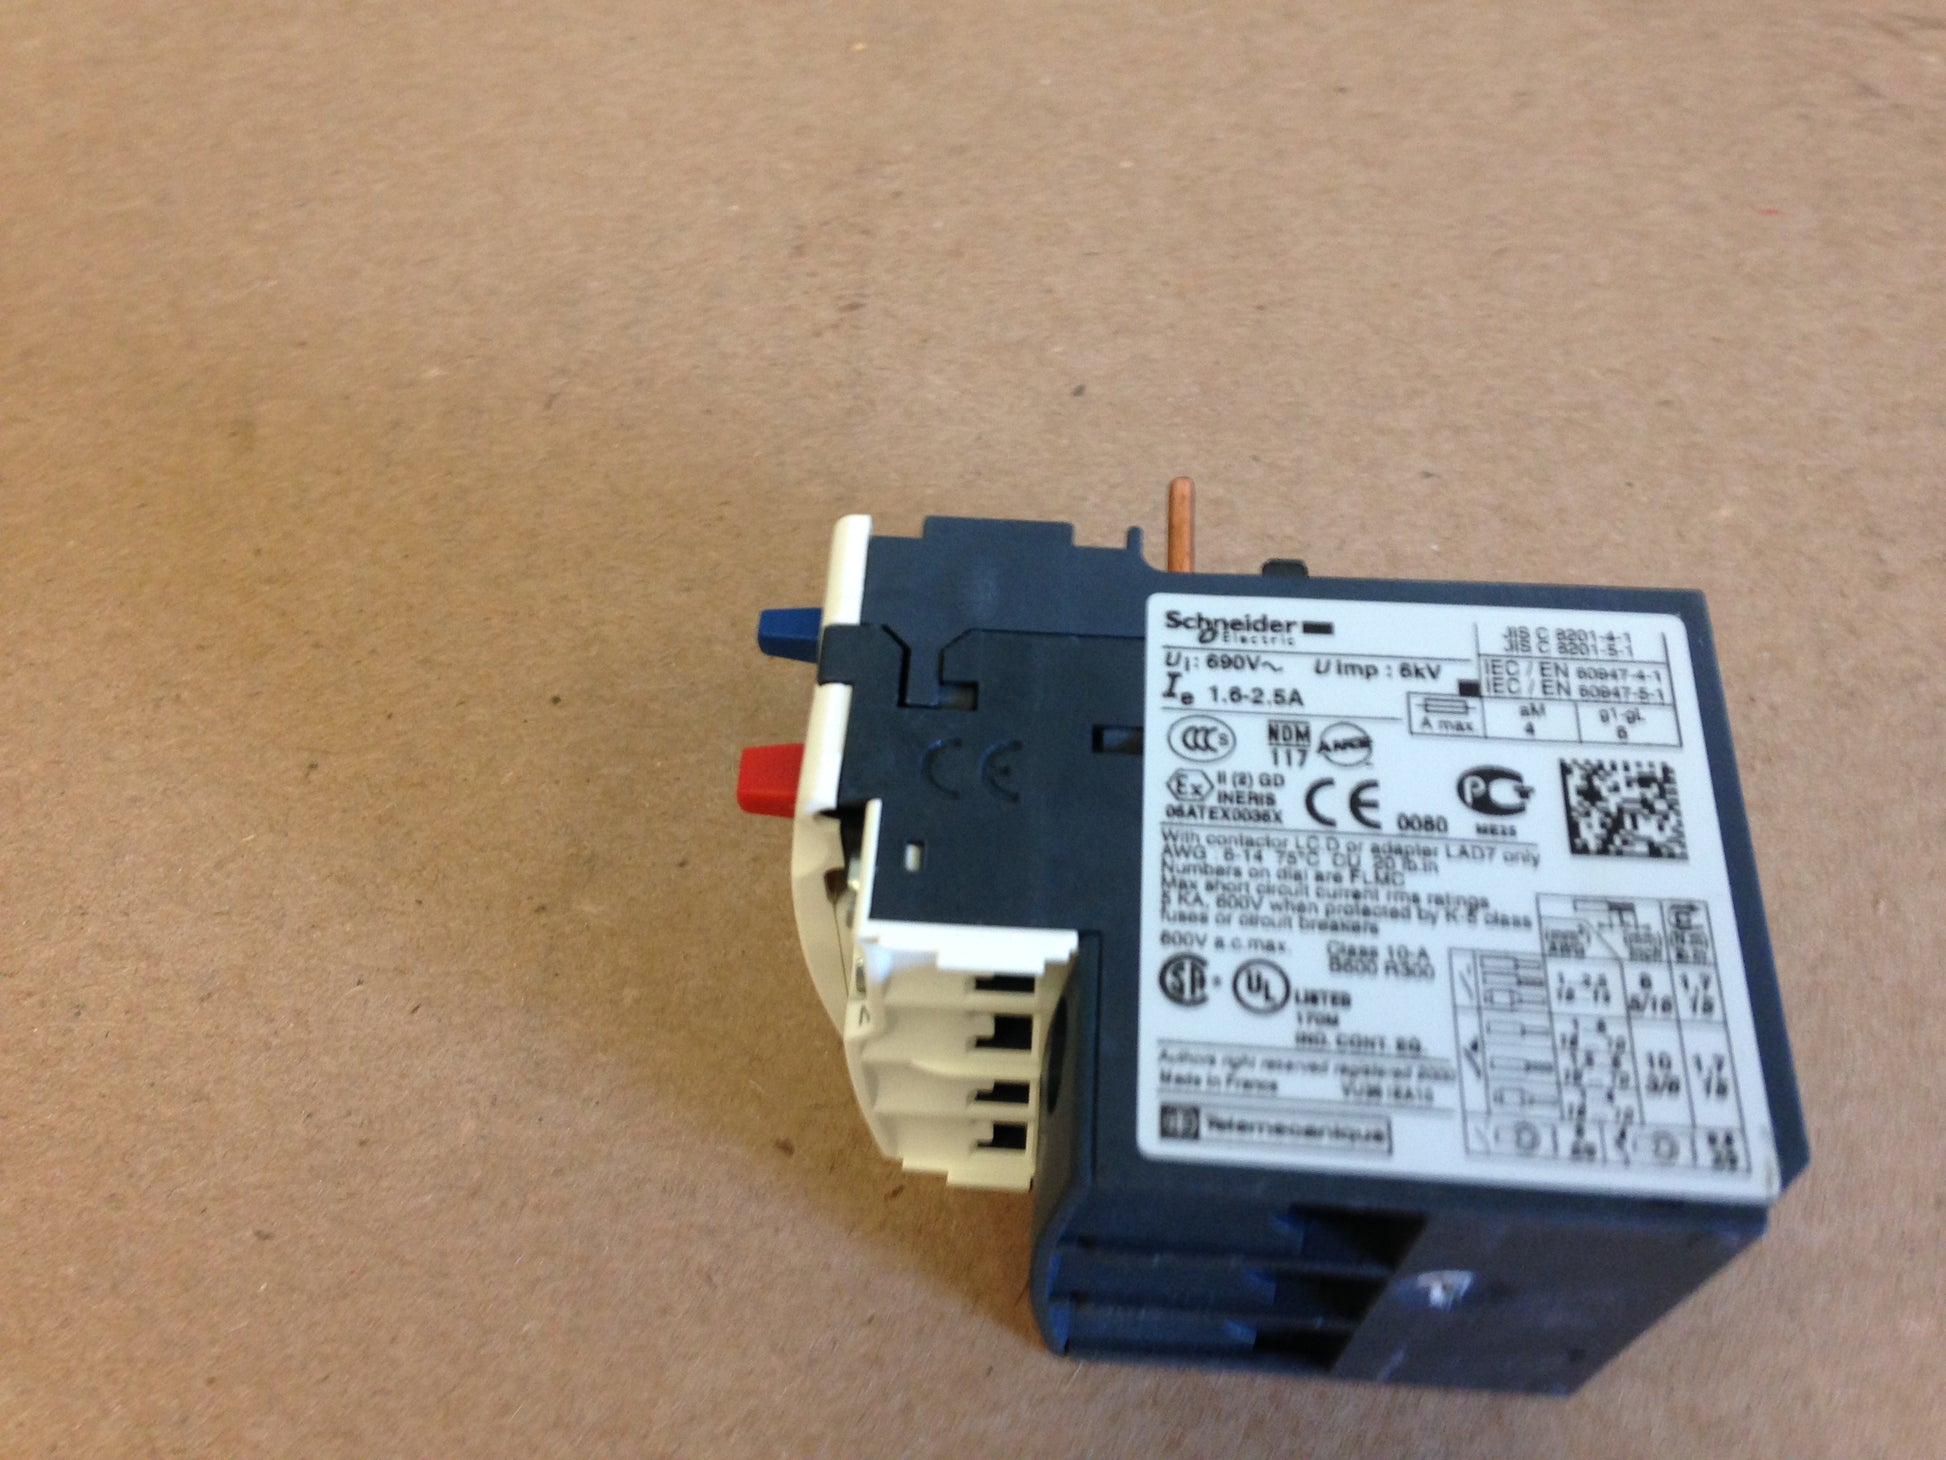 THERMAL OVERLOAD RELAY, 690V, 1.6-2.5A